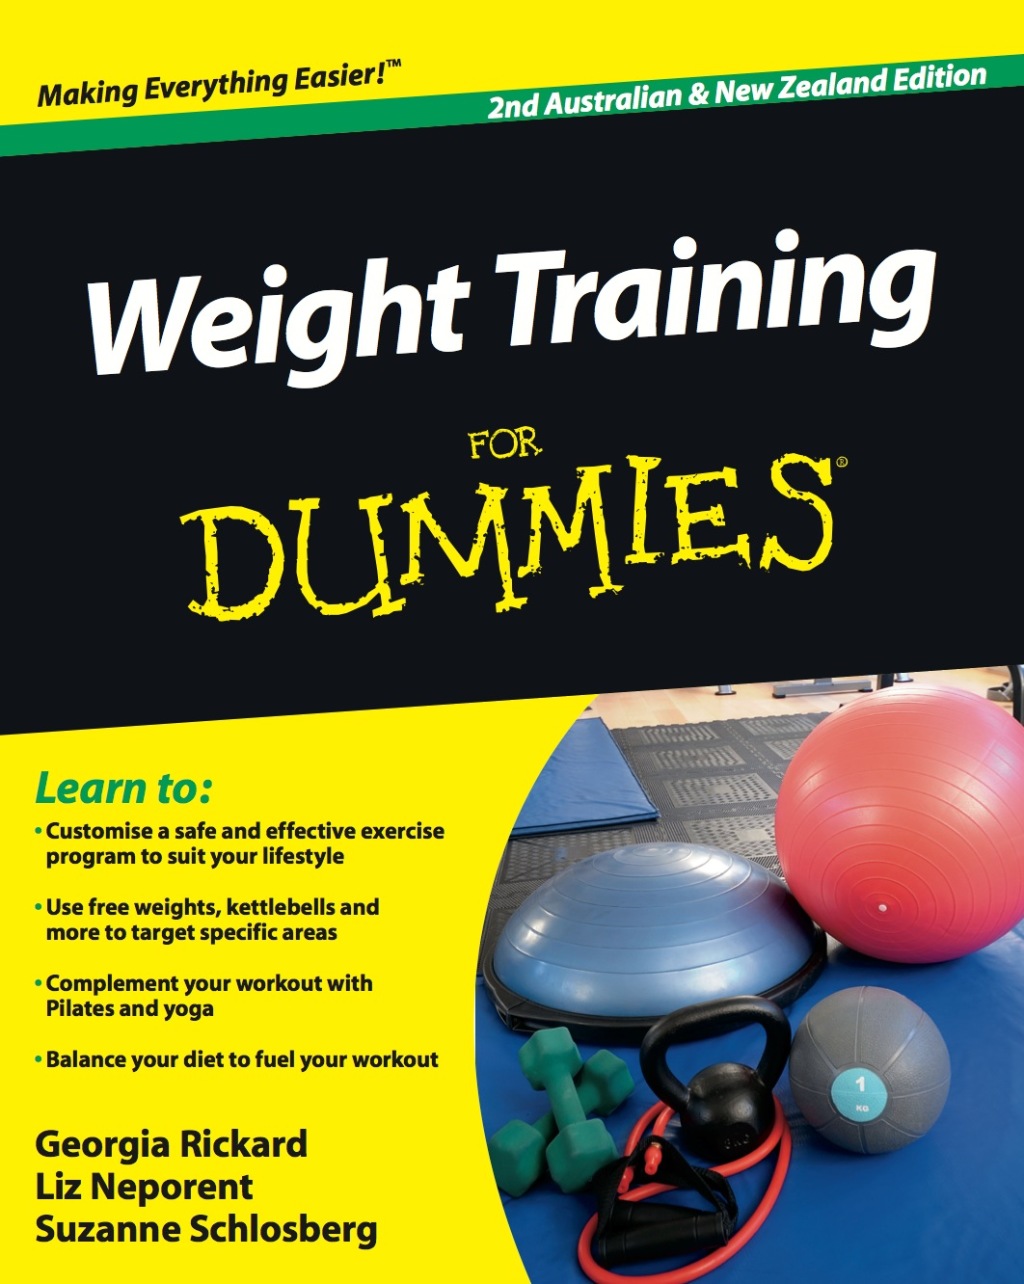 Weight Training For Dummies  Australian and New Zealand Edition - 2nd Edition (eBook)